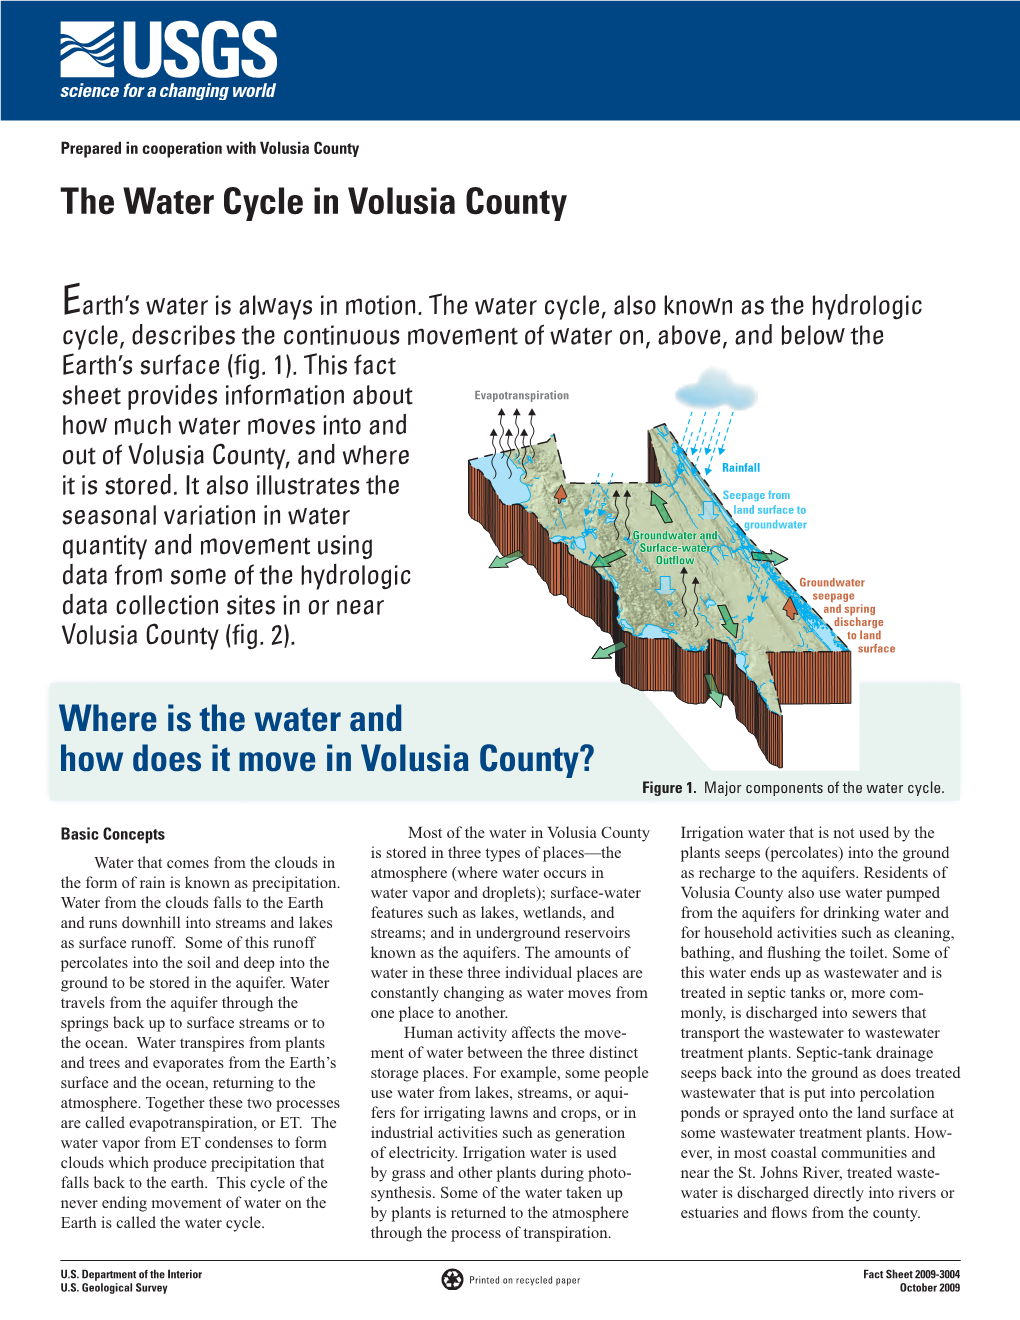 The Water Cycle in Volusia County